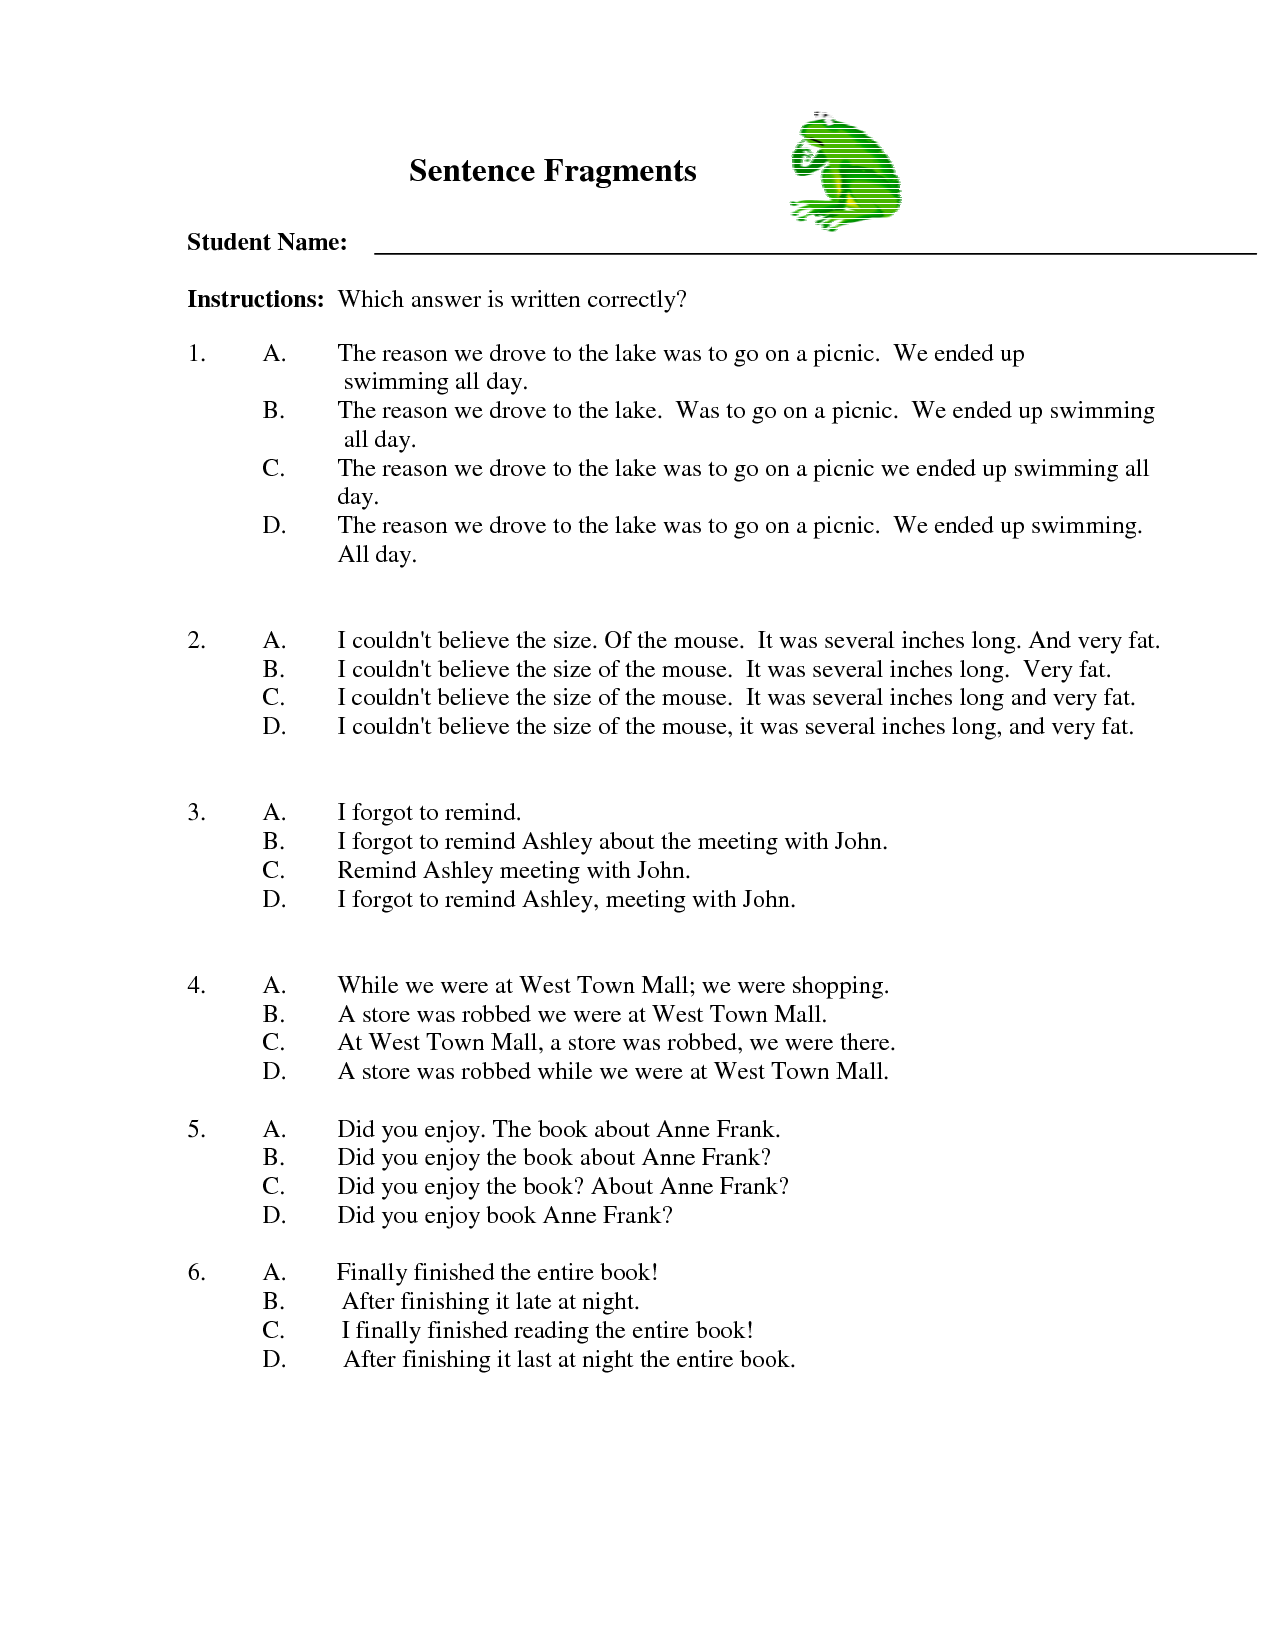 fragments-and-run-on-sentences-worksheet-for-6th-grade-lesson-planet